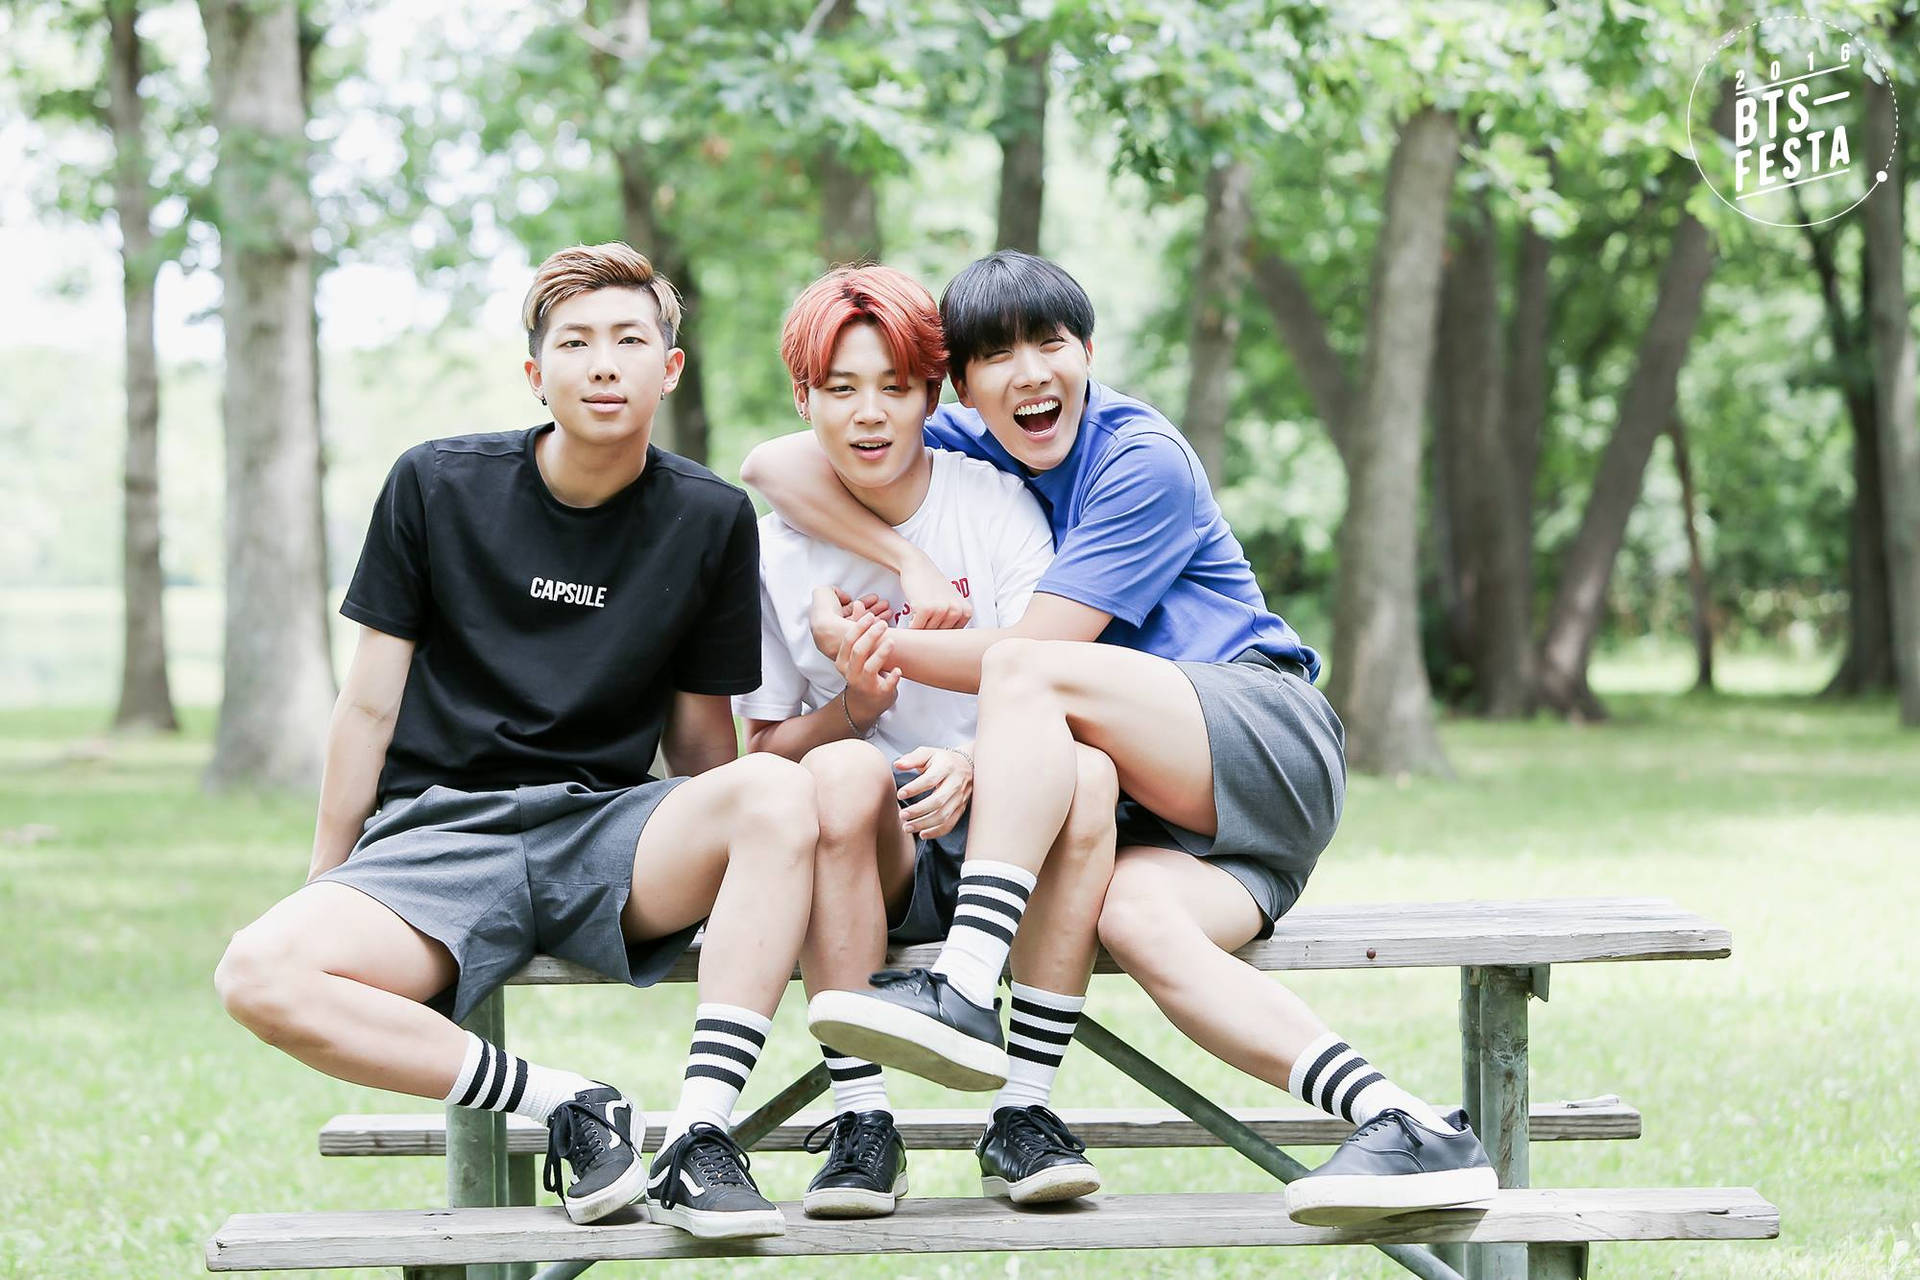 Aesthetic Bts Trio On Park Bench Background